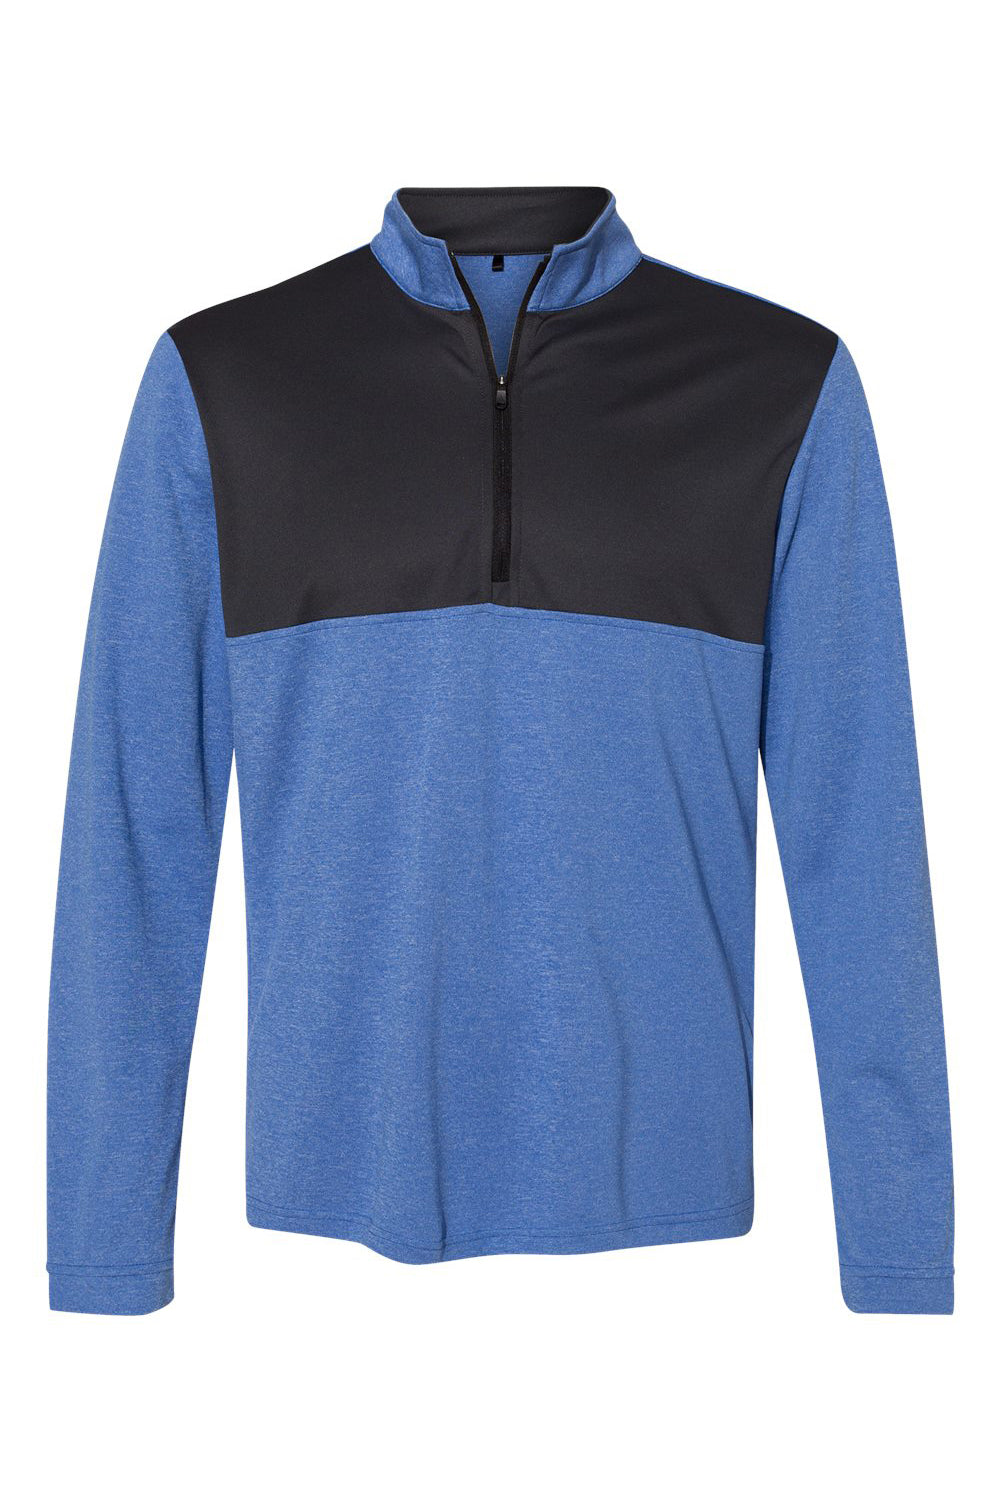 Adidas A280 Mens 1/4 Zip Pullover Heather Collegiate Royal Blue/Carbon Grey Flat Front